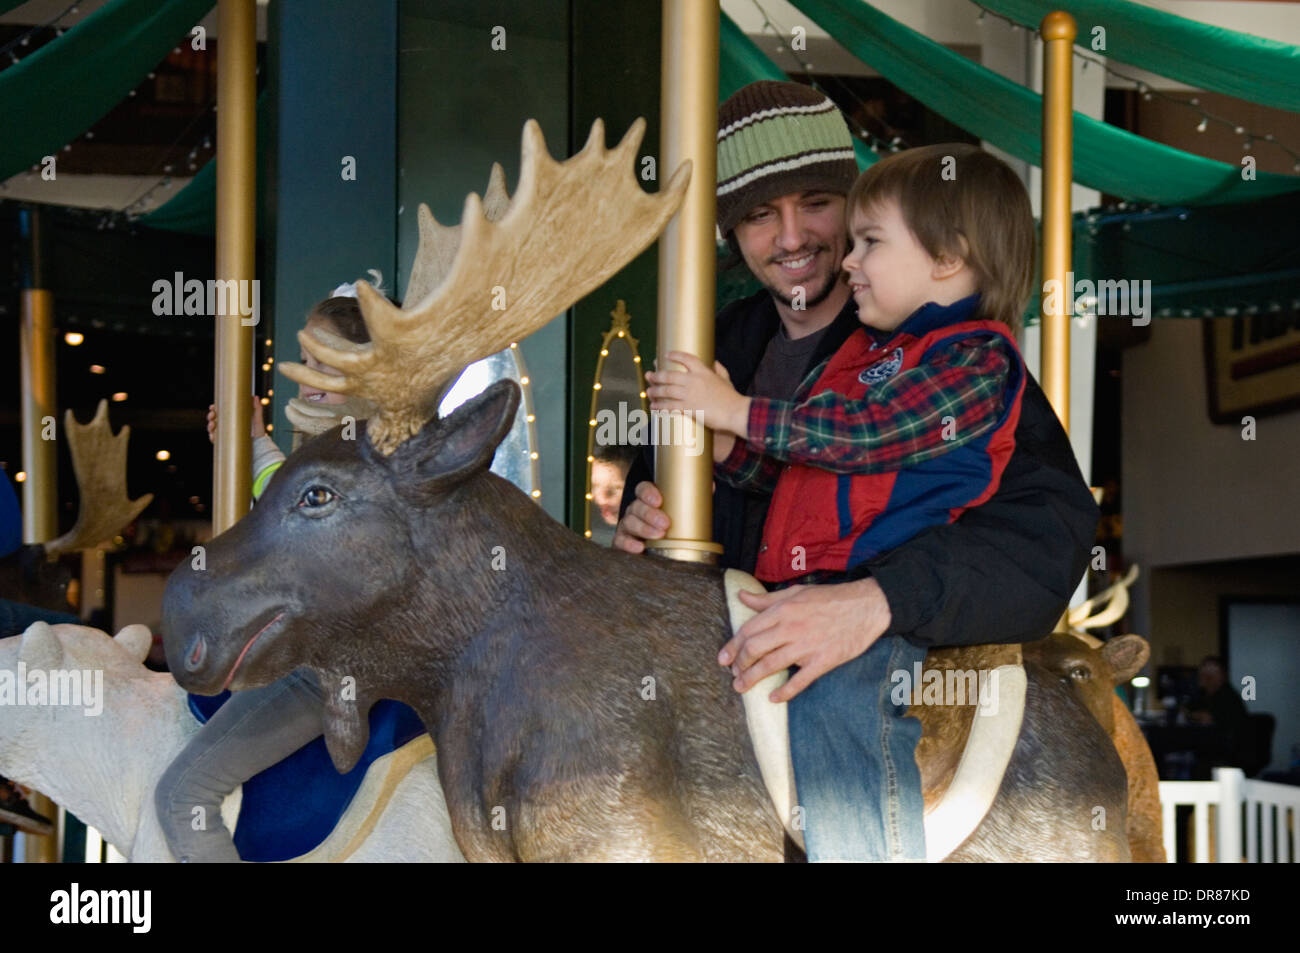 Father with Young Son Riding a Moose on a Carousel Stock Photo